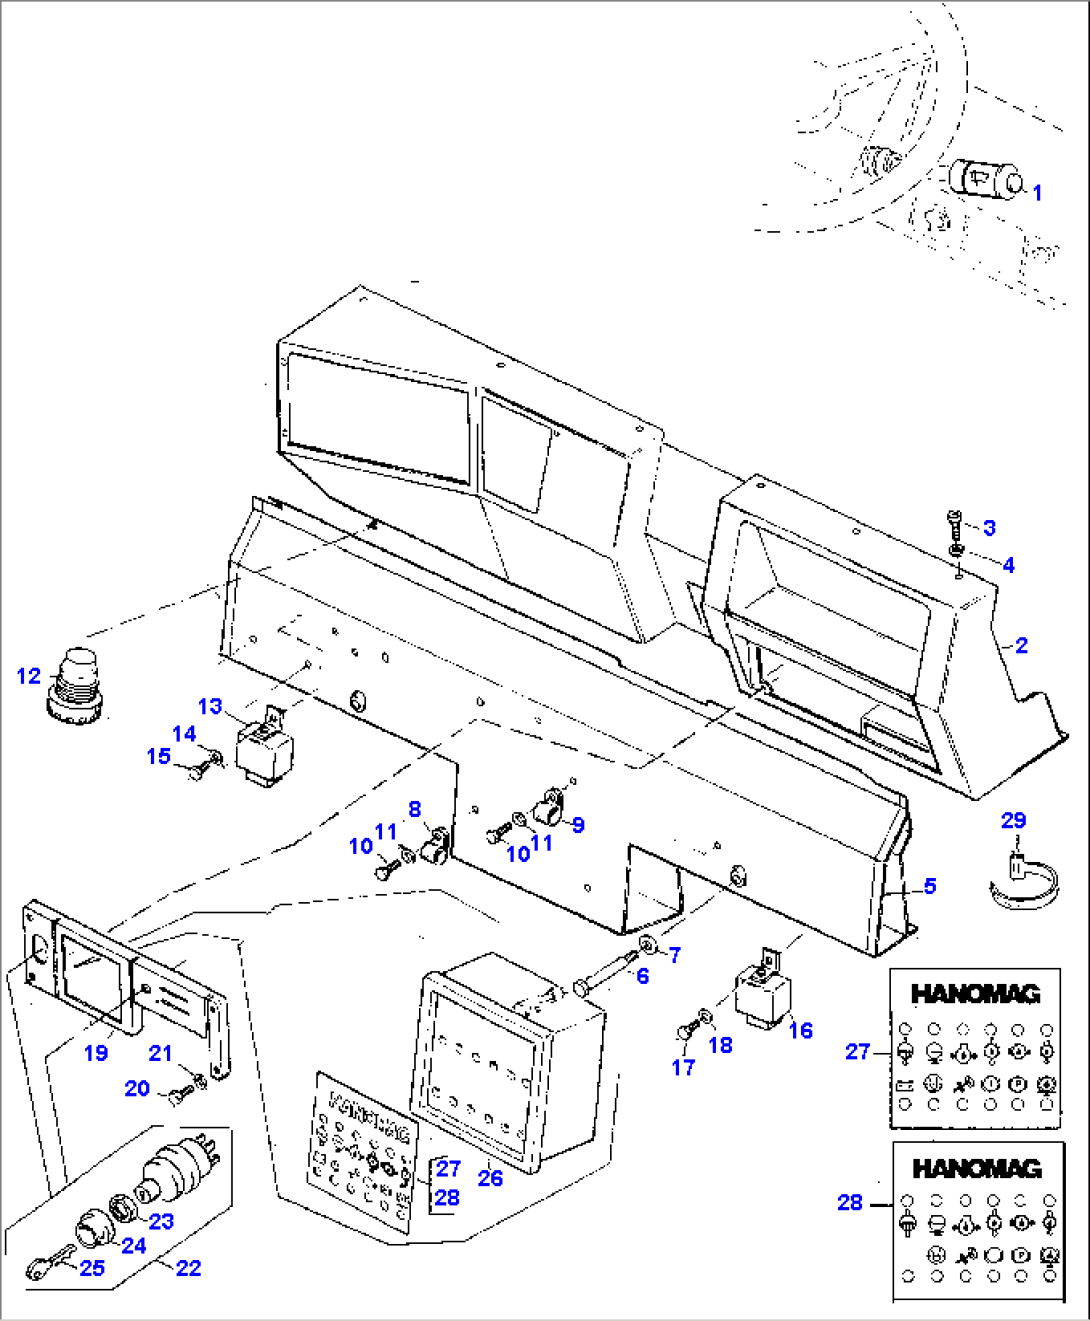 INSTRUMENT PANEL AND ATTACHING PARTS